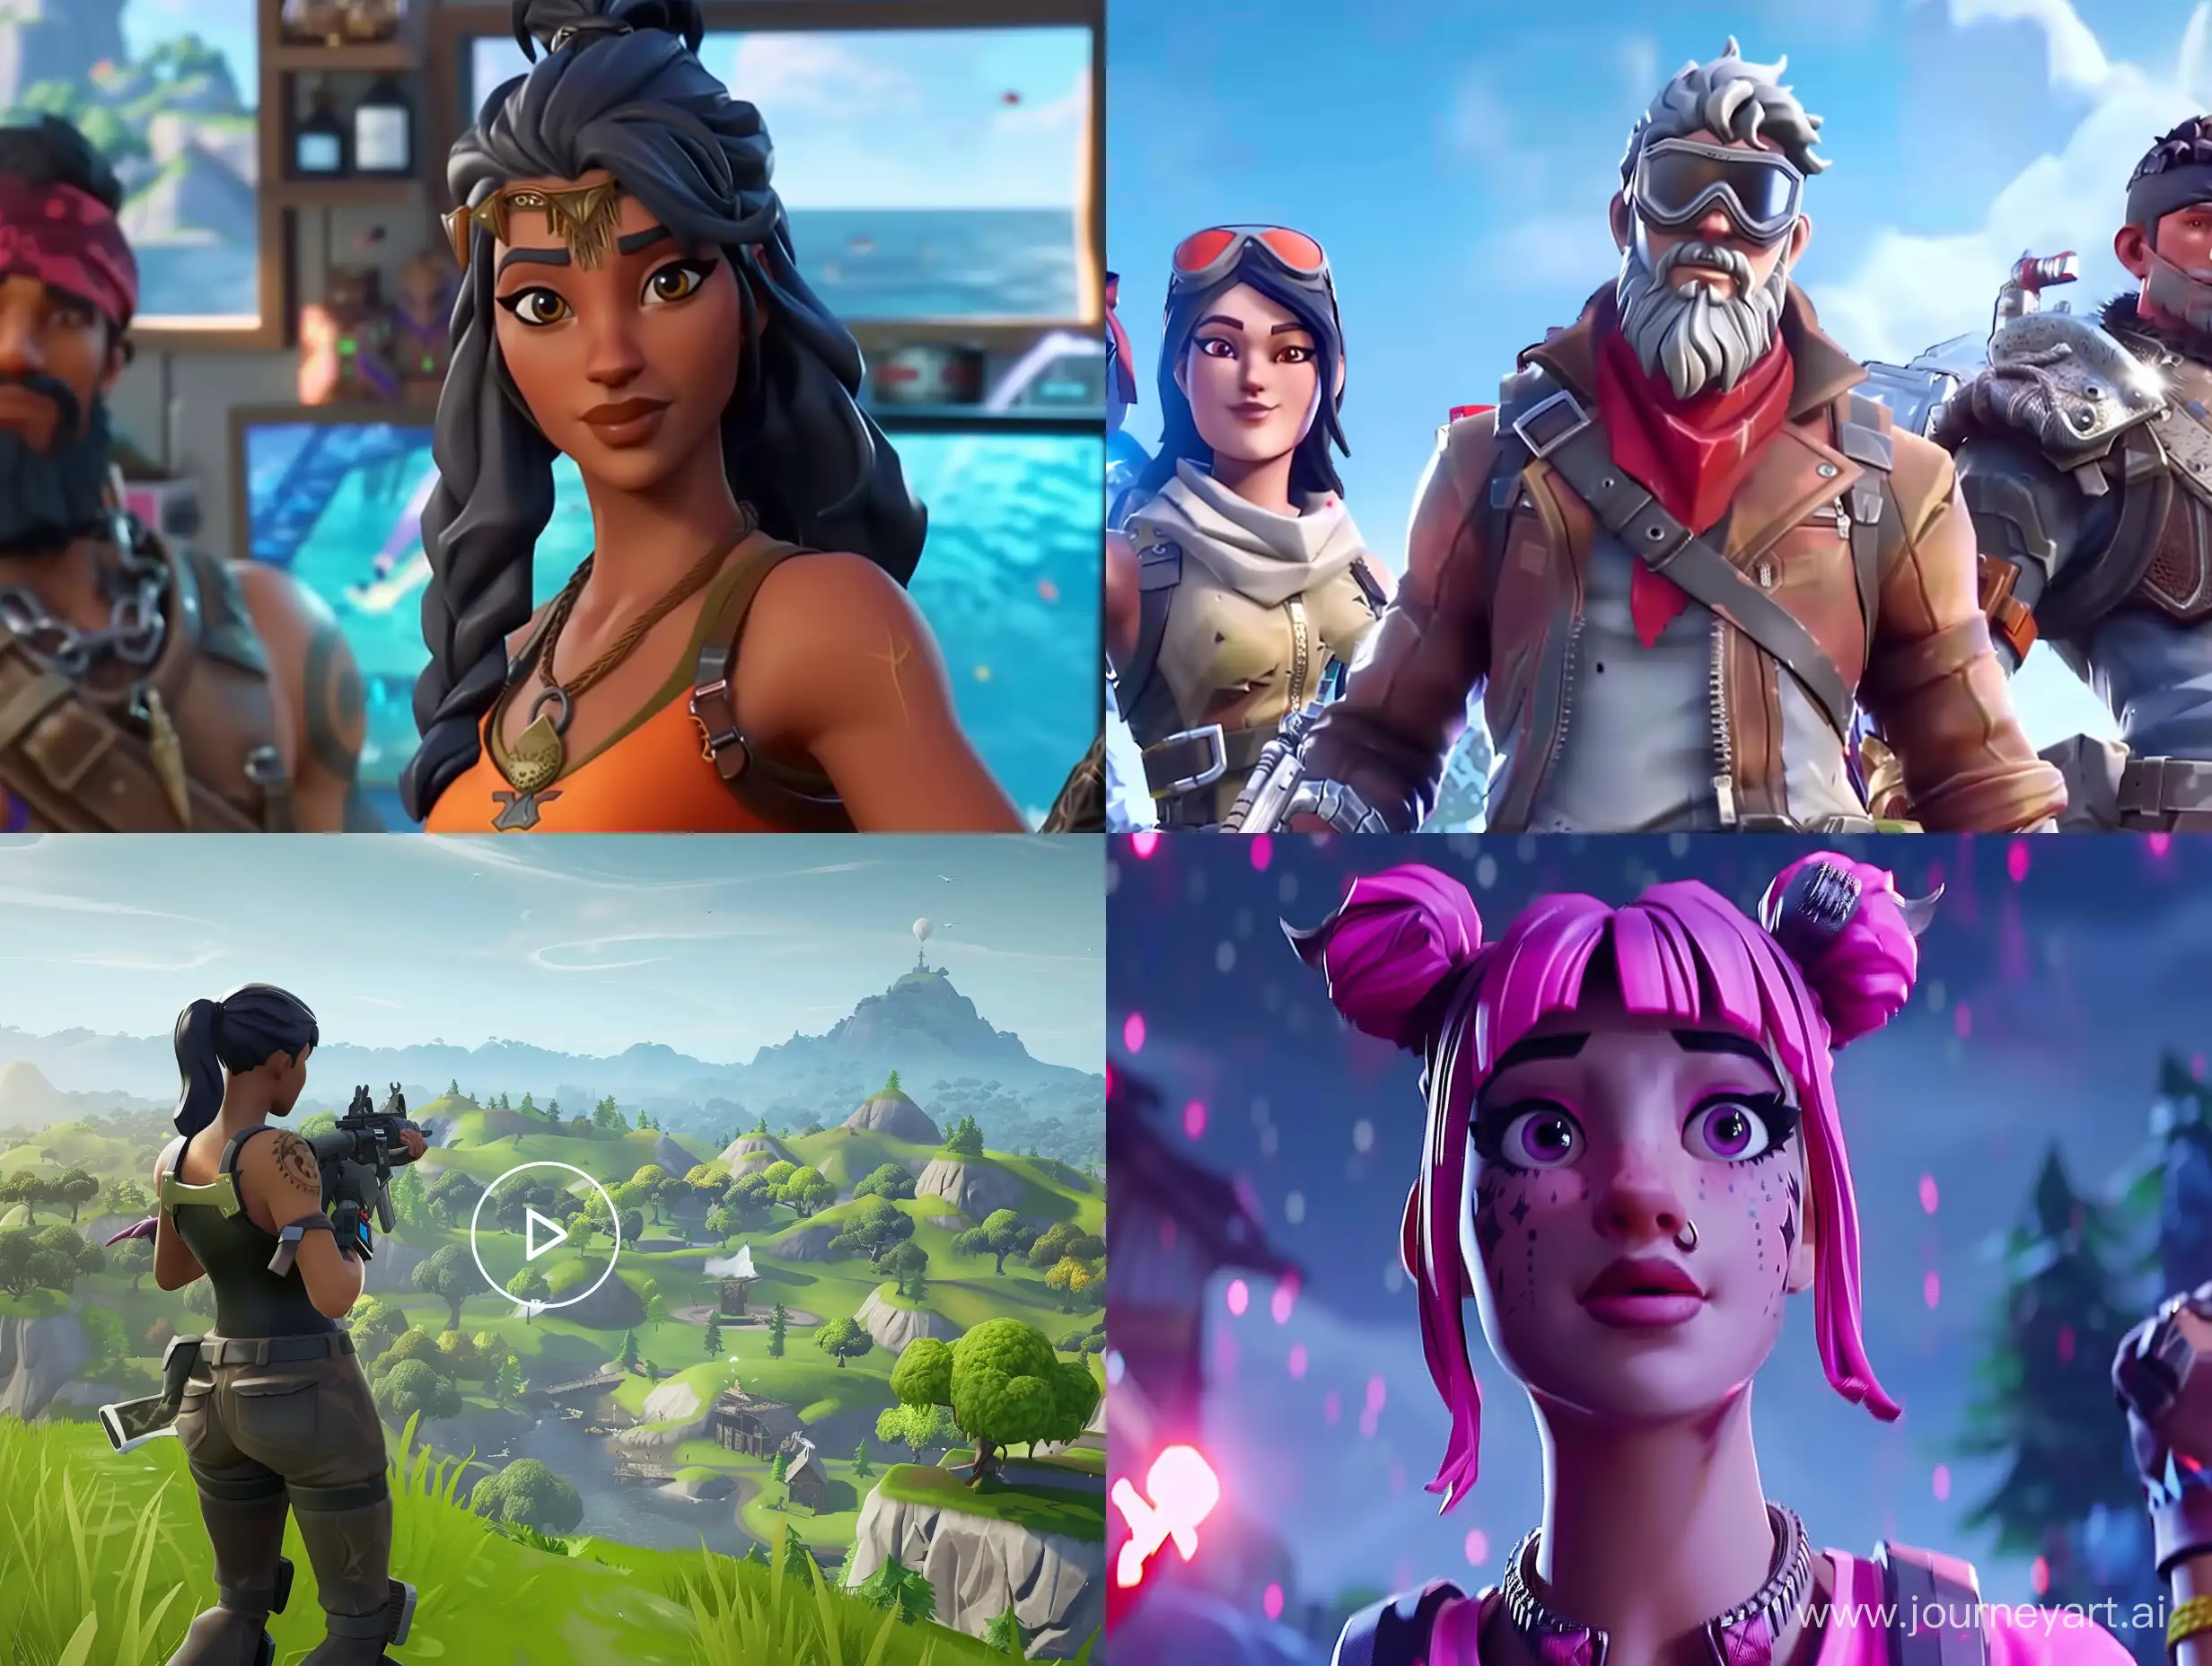 Fortnite-Game-Preview-Actionpacked-Adventure-in-43-Aspect-Ratio